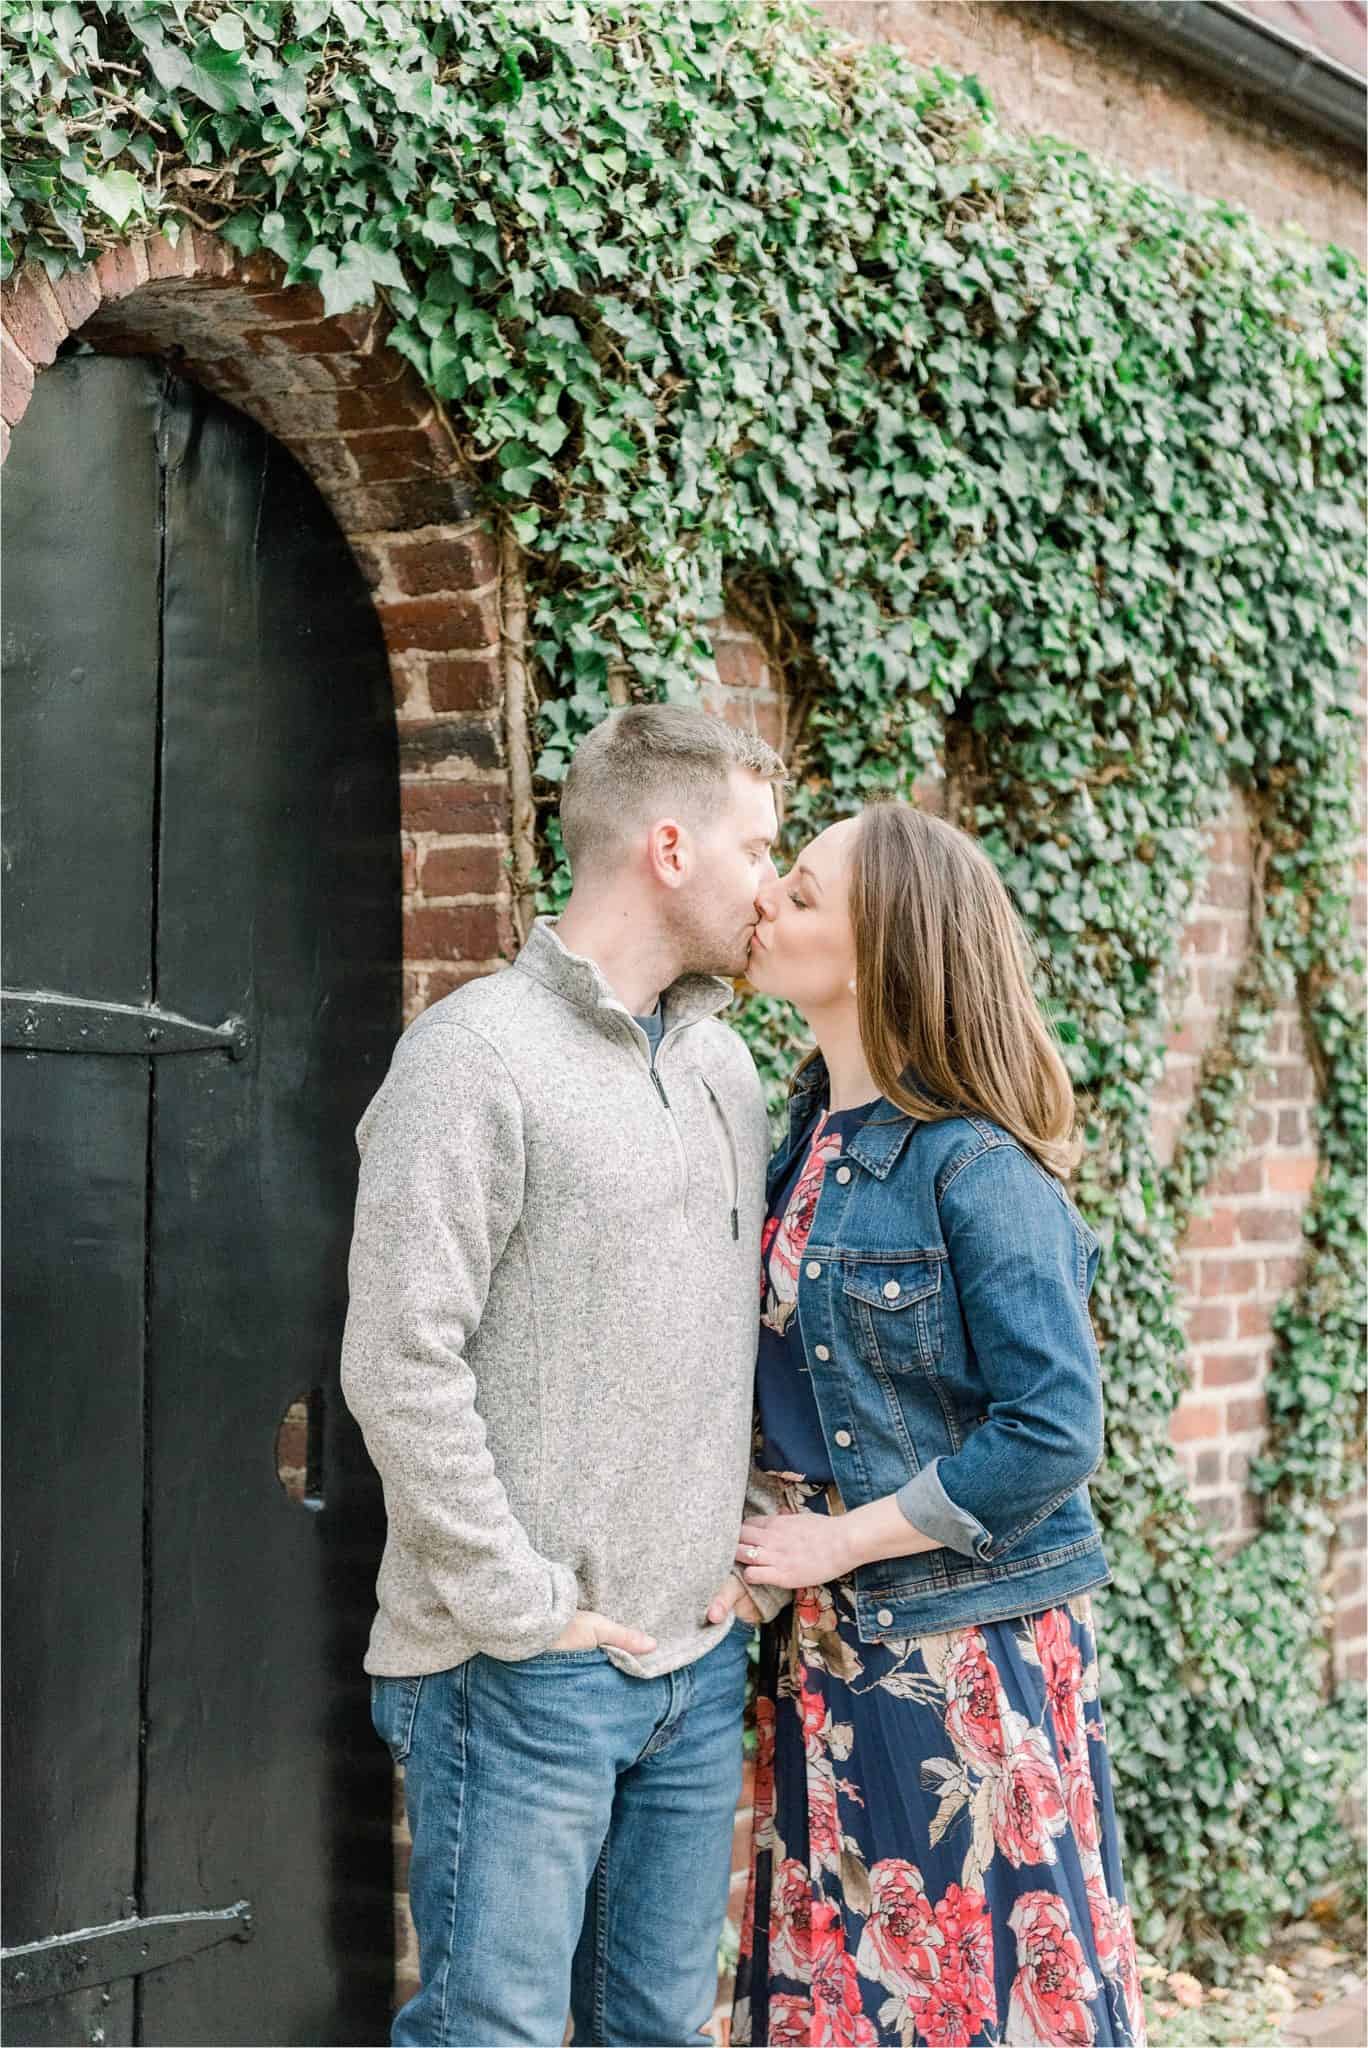 Old Town Alexandria Virginia Engagement Session